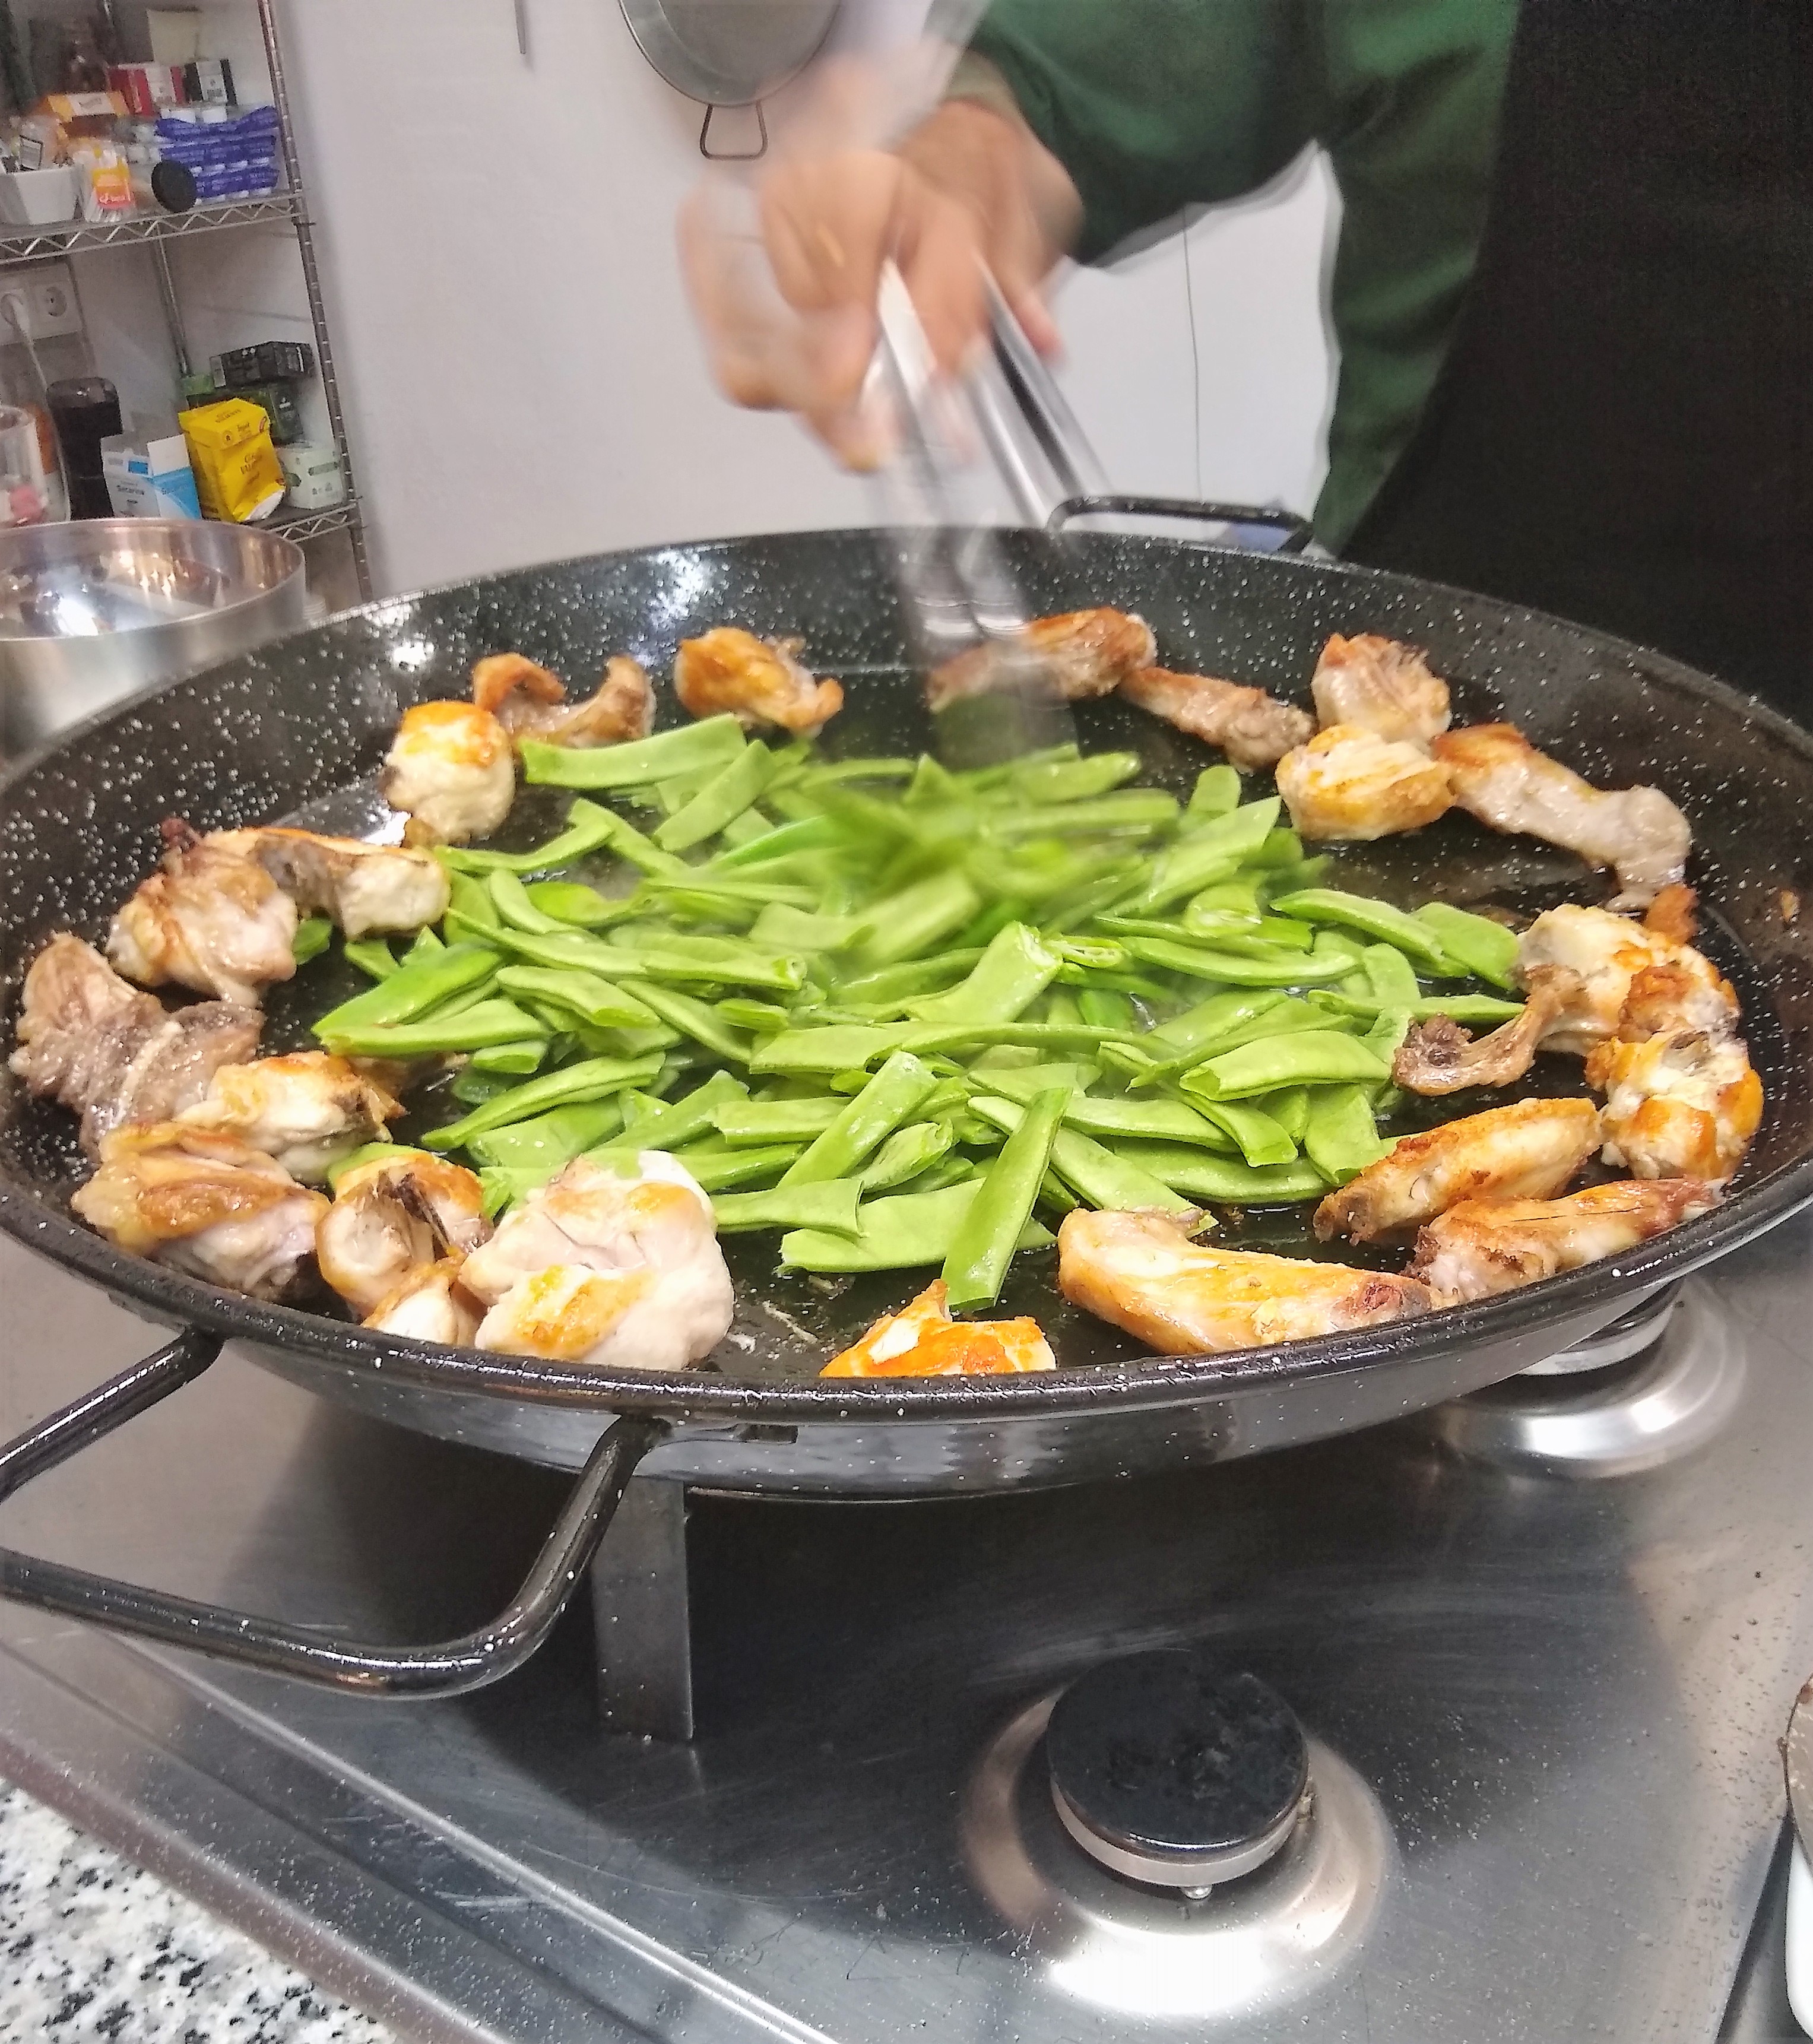 Cooking Paella, Valencia Spain, TravelsWithSuz.com